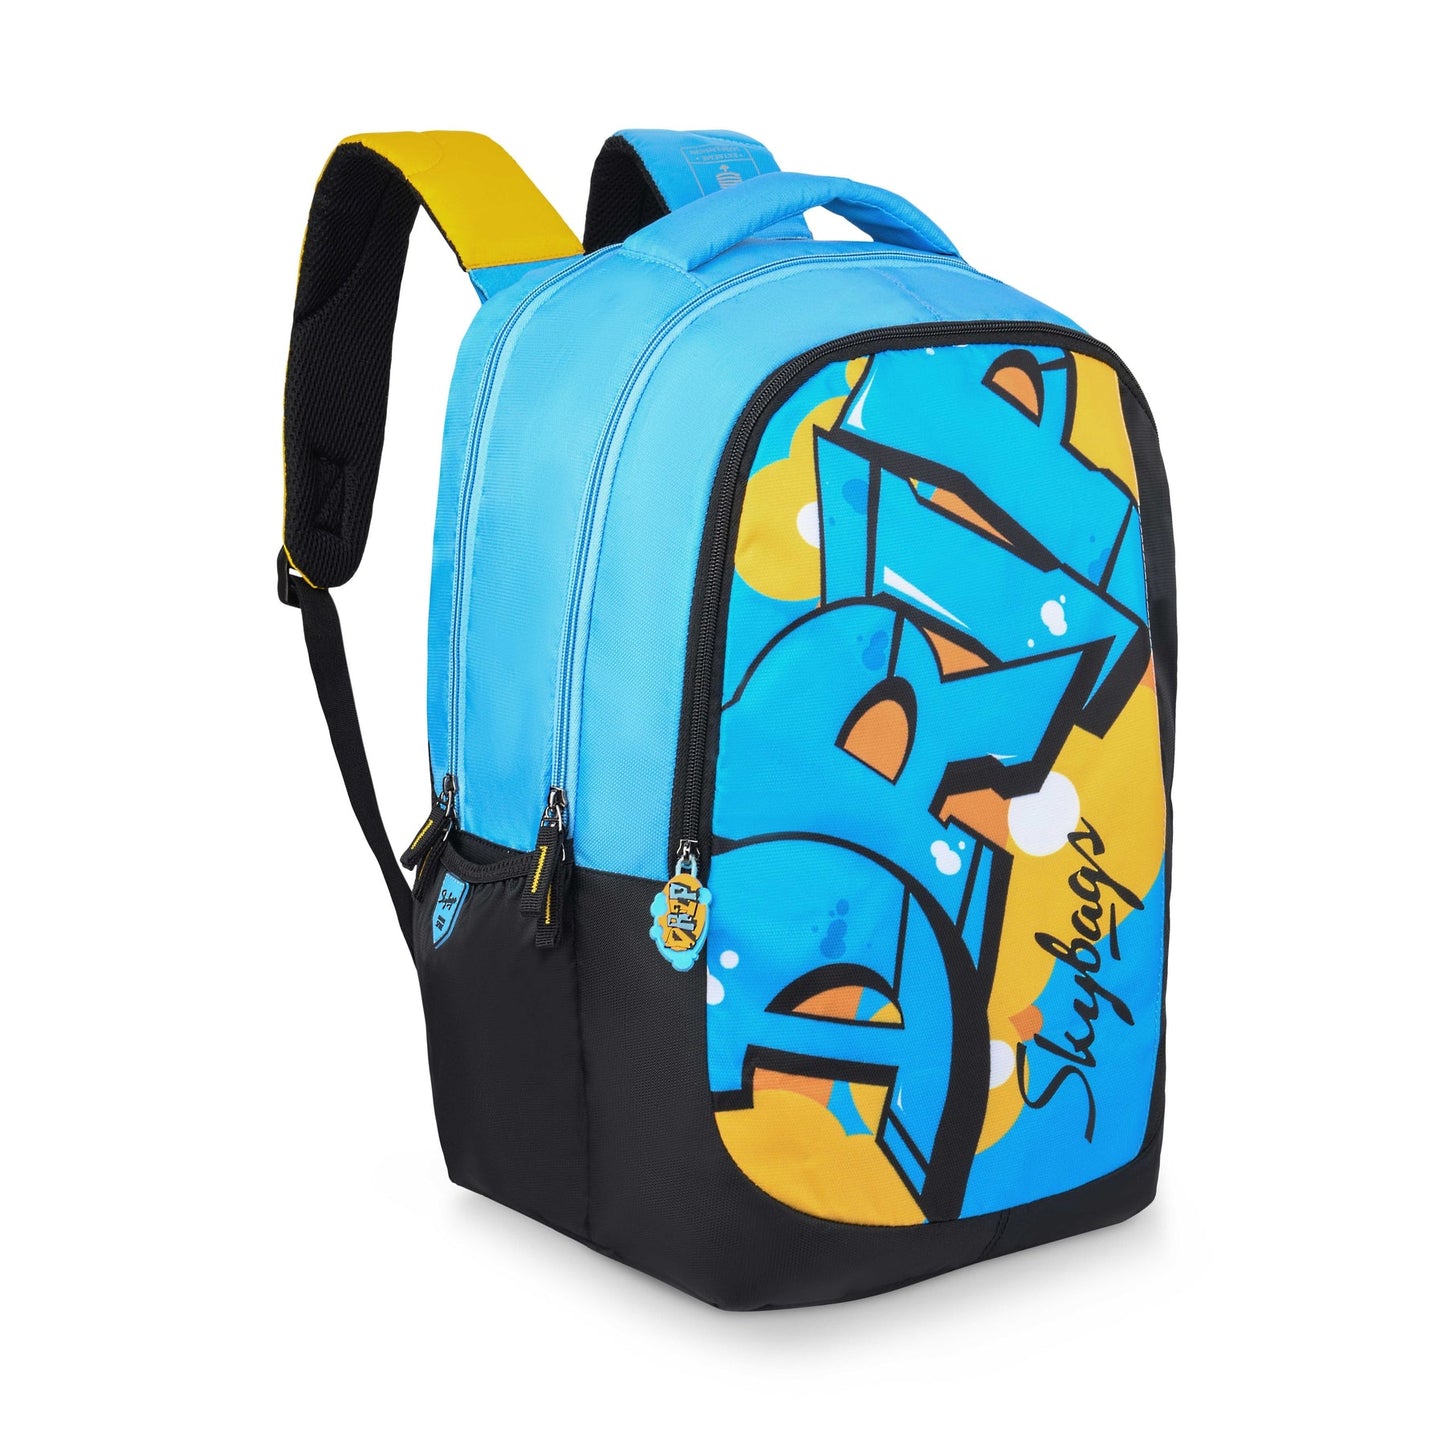 Skybags Squad Pro 04 41L Backpack